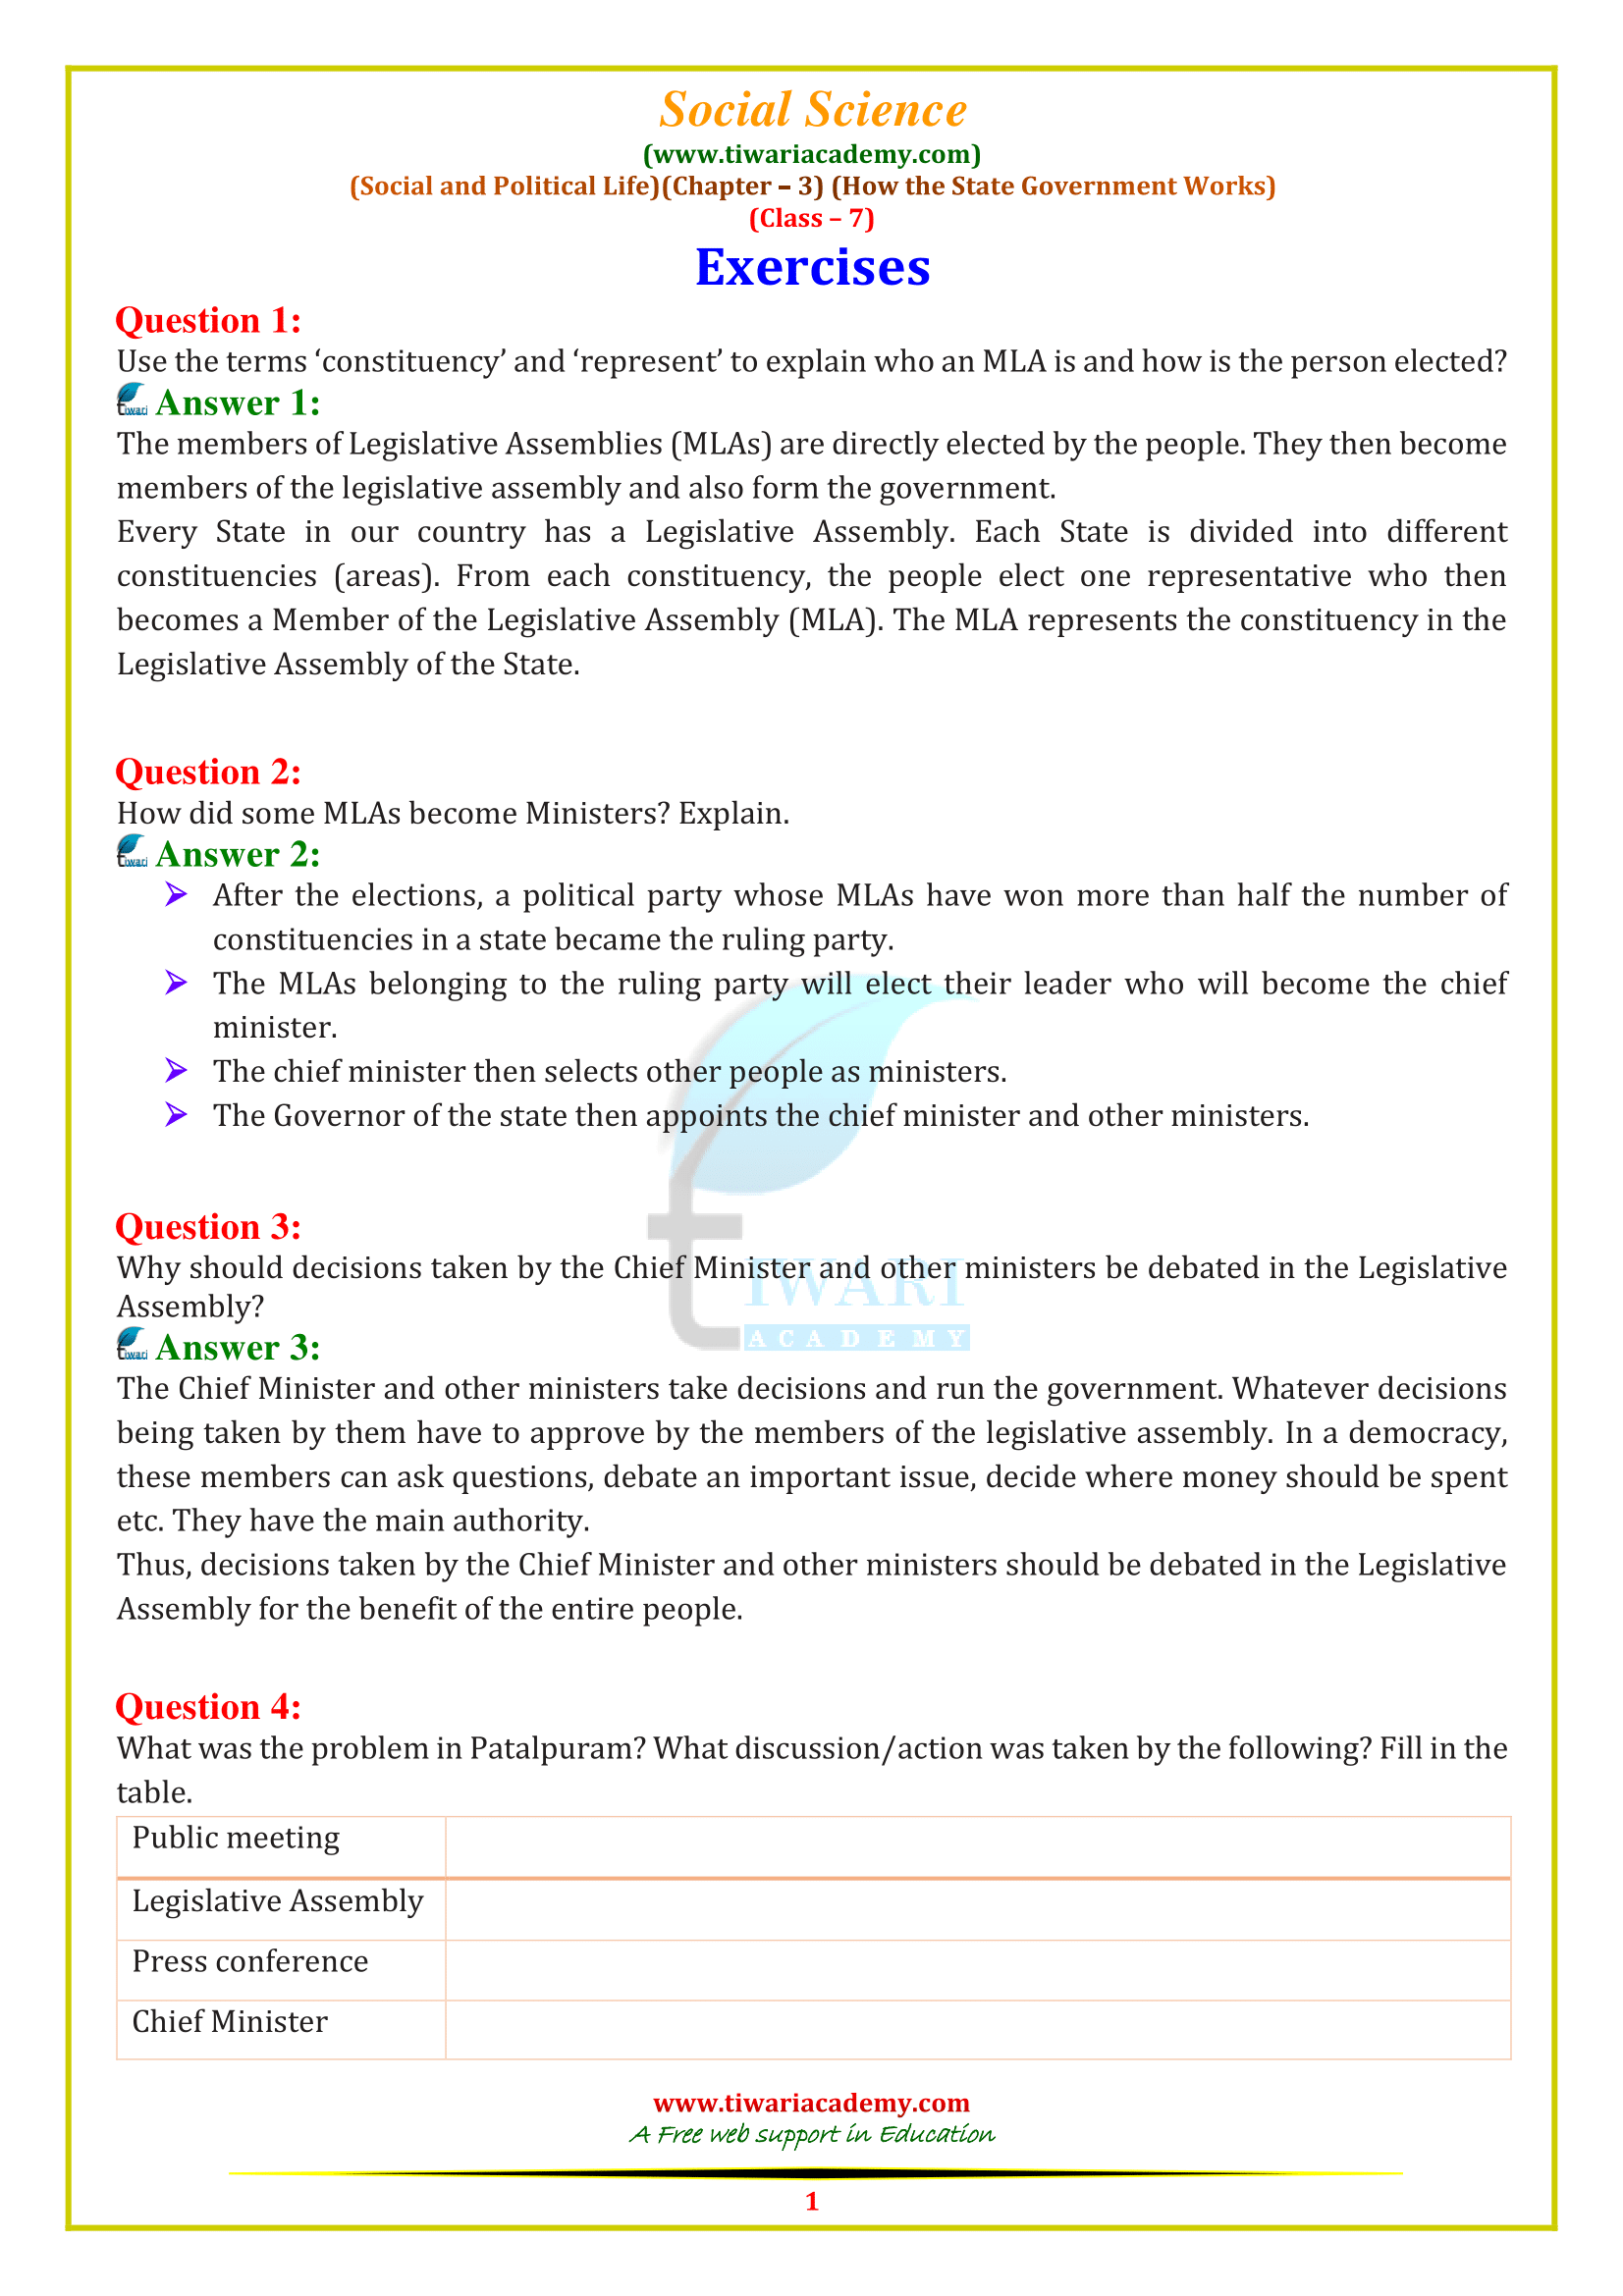 NCERT Solutions for Class 7 Social Science Civics Chapter 3 How the State Government Works